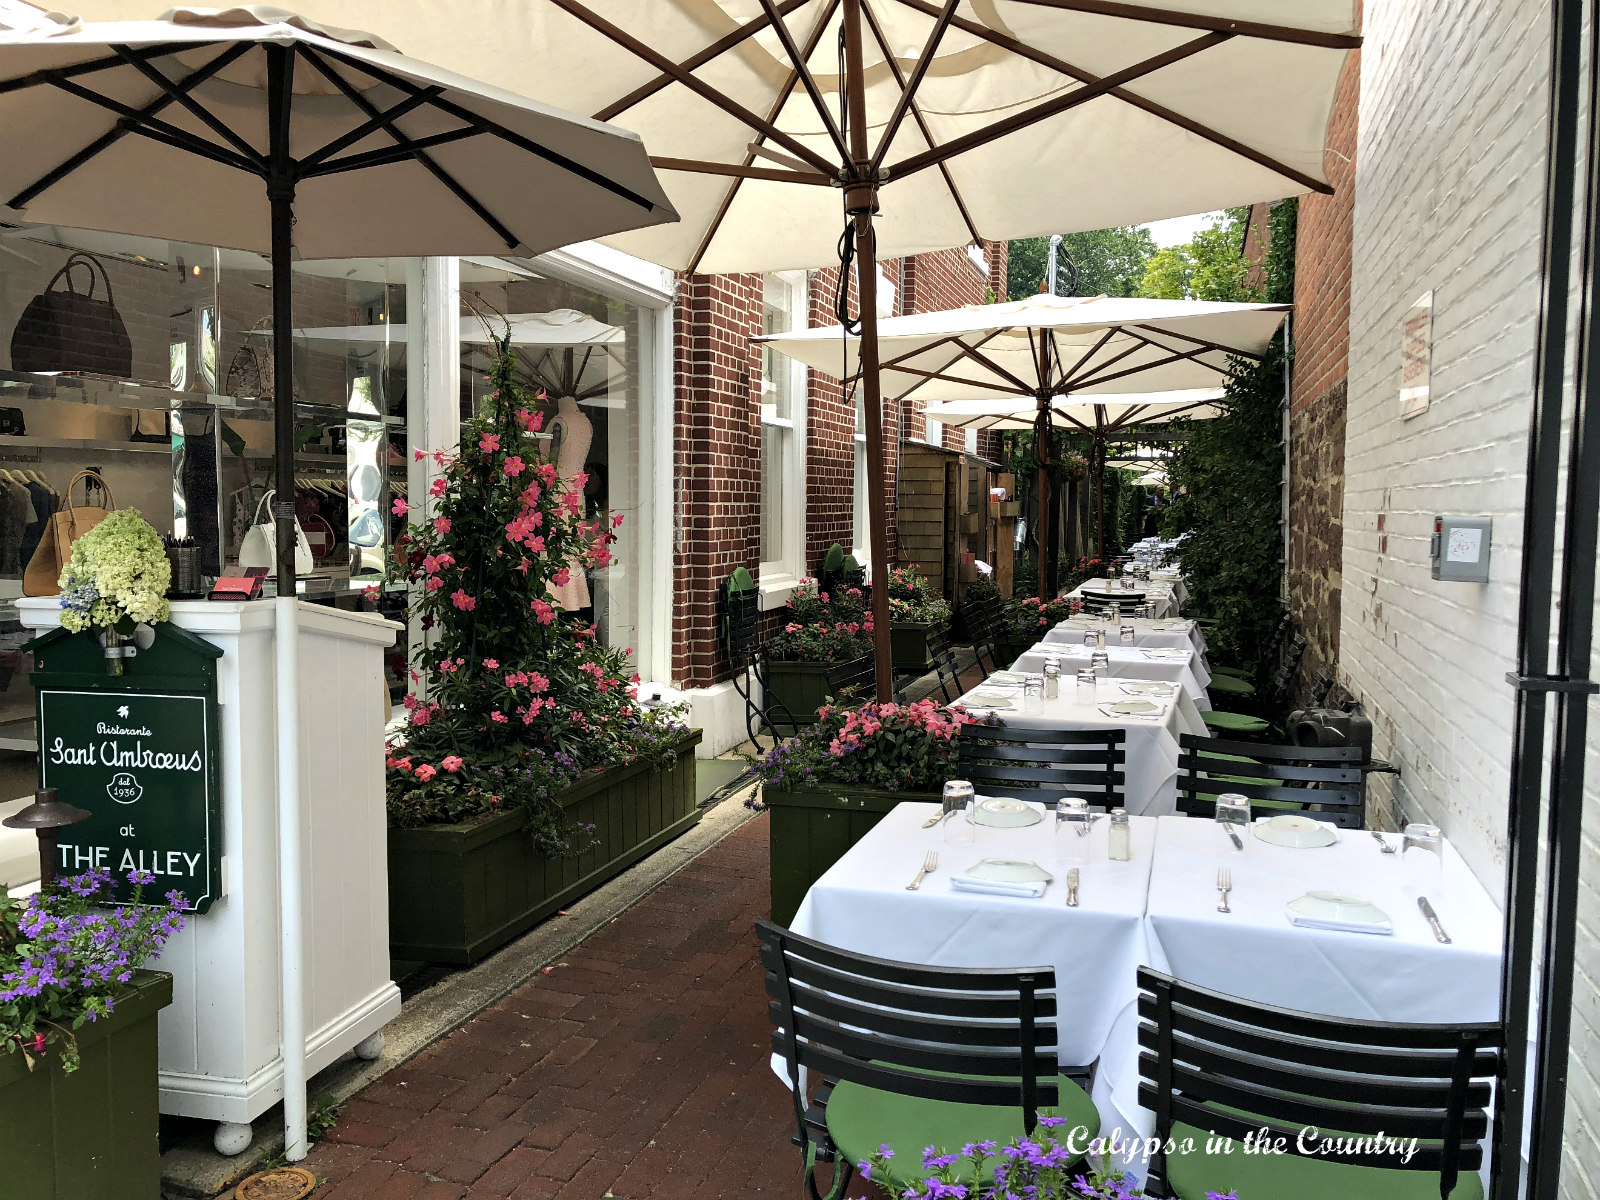 Tables and umbrellas at outdoor restaurant in Southampton NY